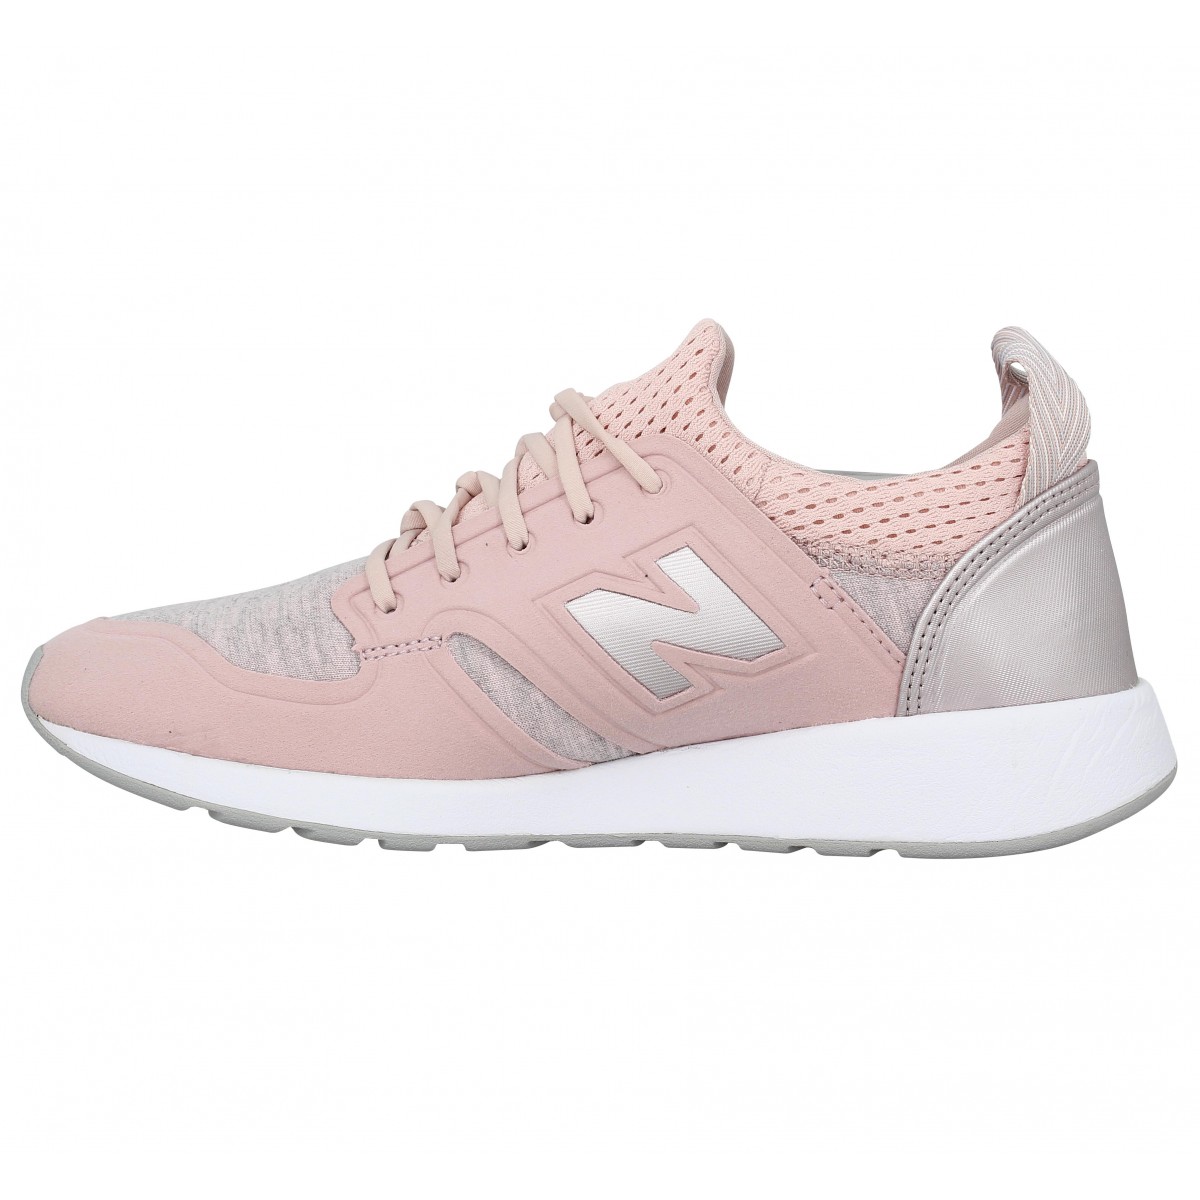 Chaussures New balance wrl 420 toile femme rose femme | Fanny ...